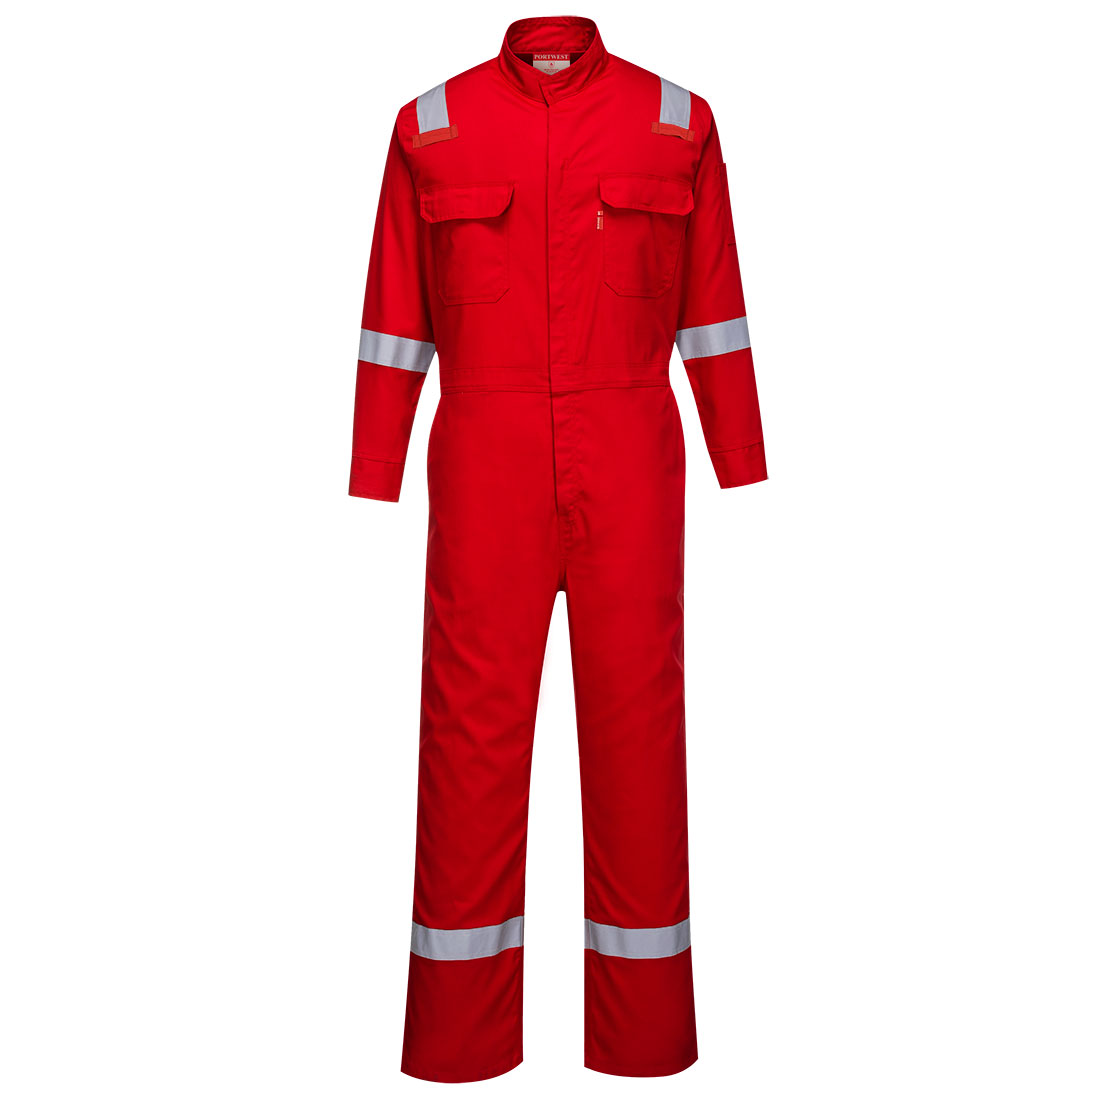 Flame Resistant, Coveralls